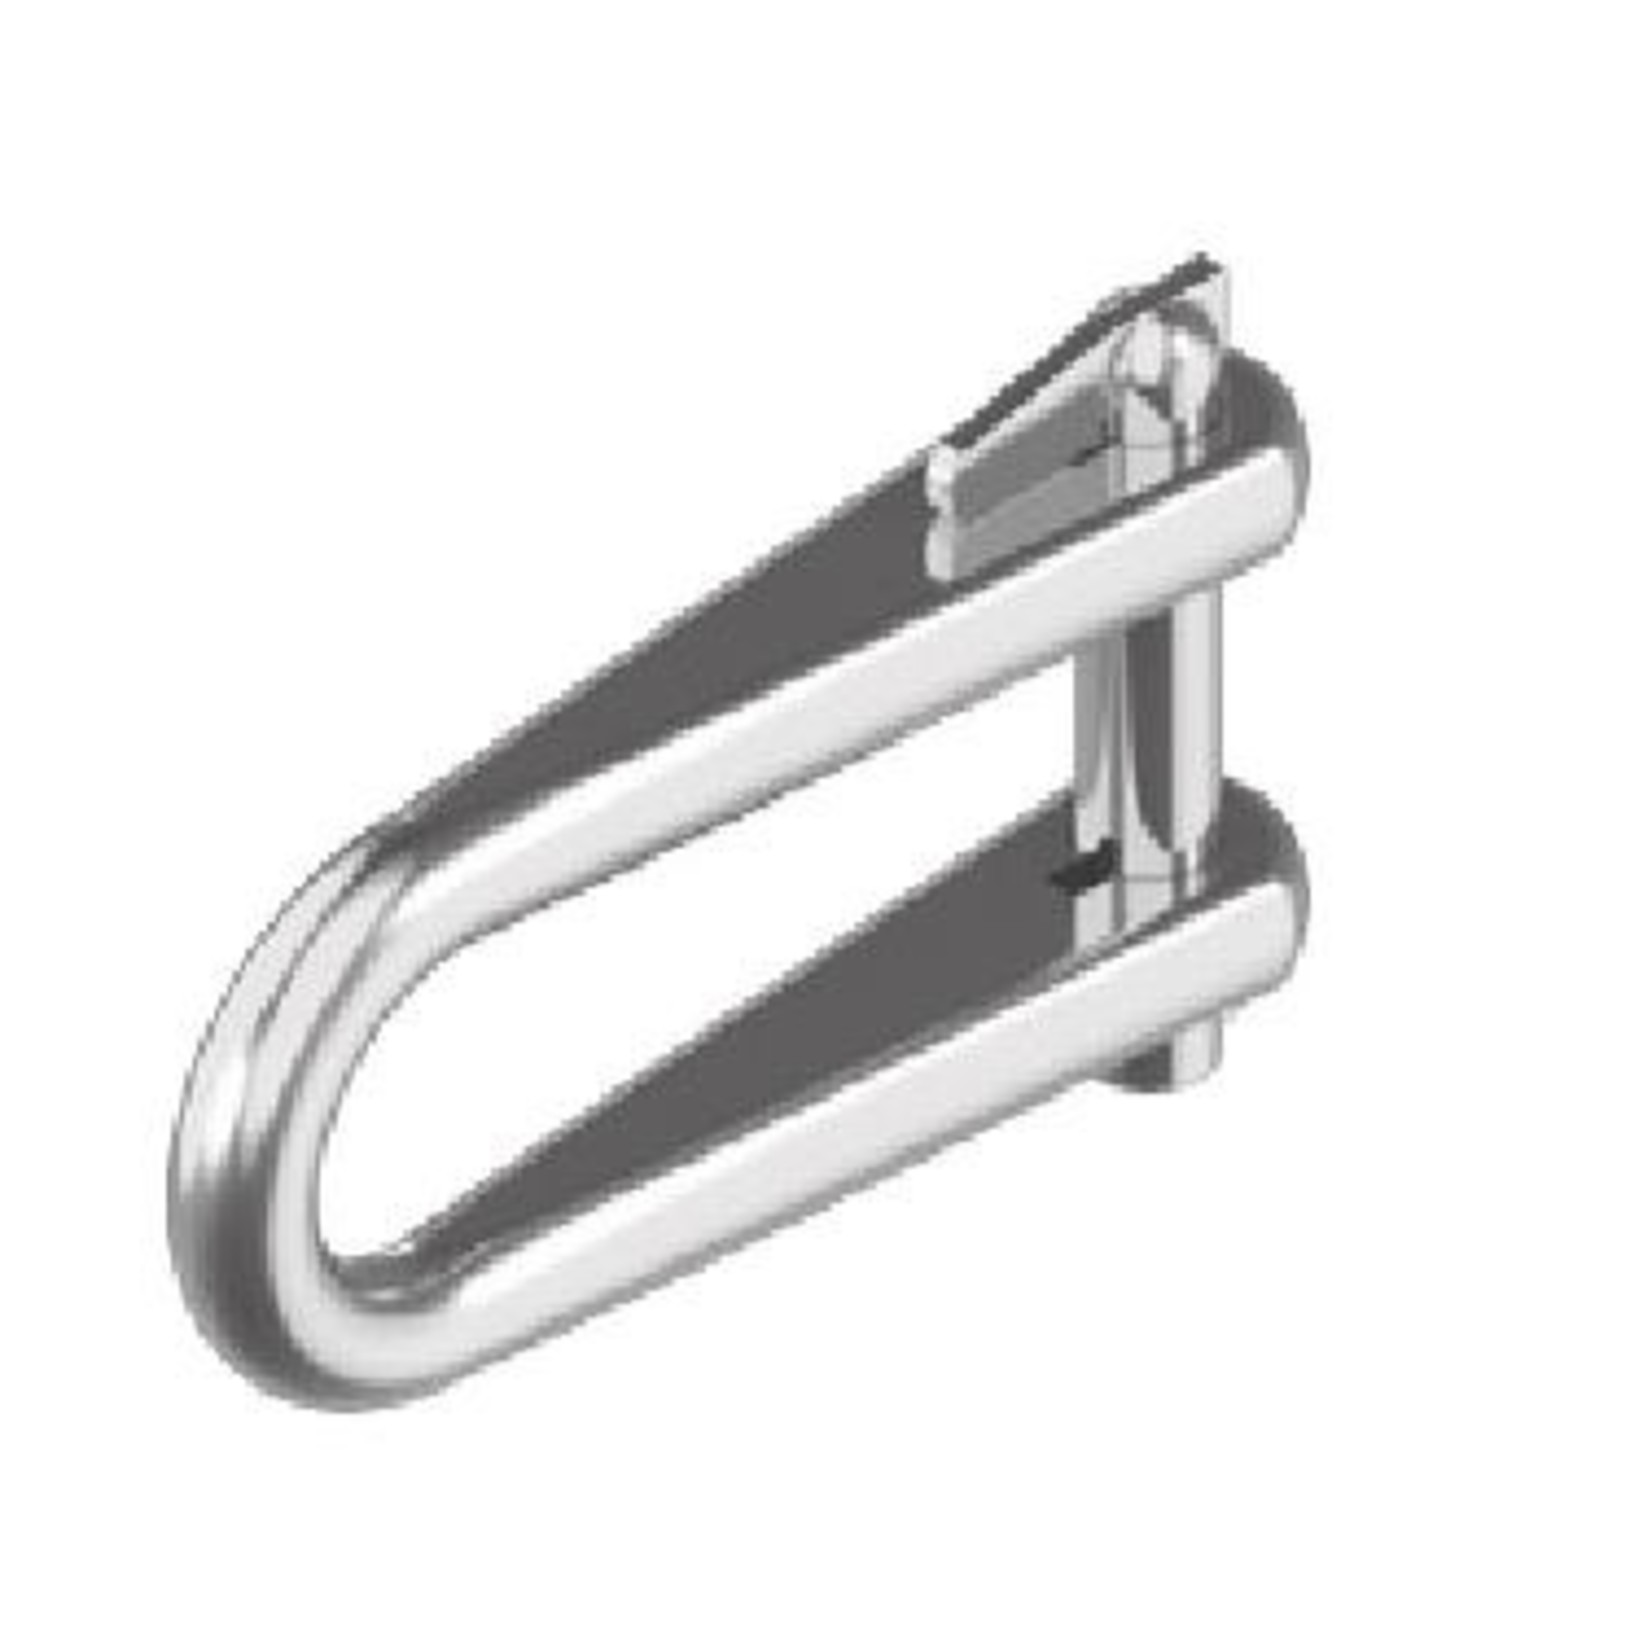 Key pin shackle stainless 8mm